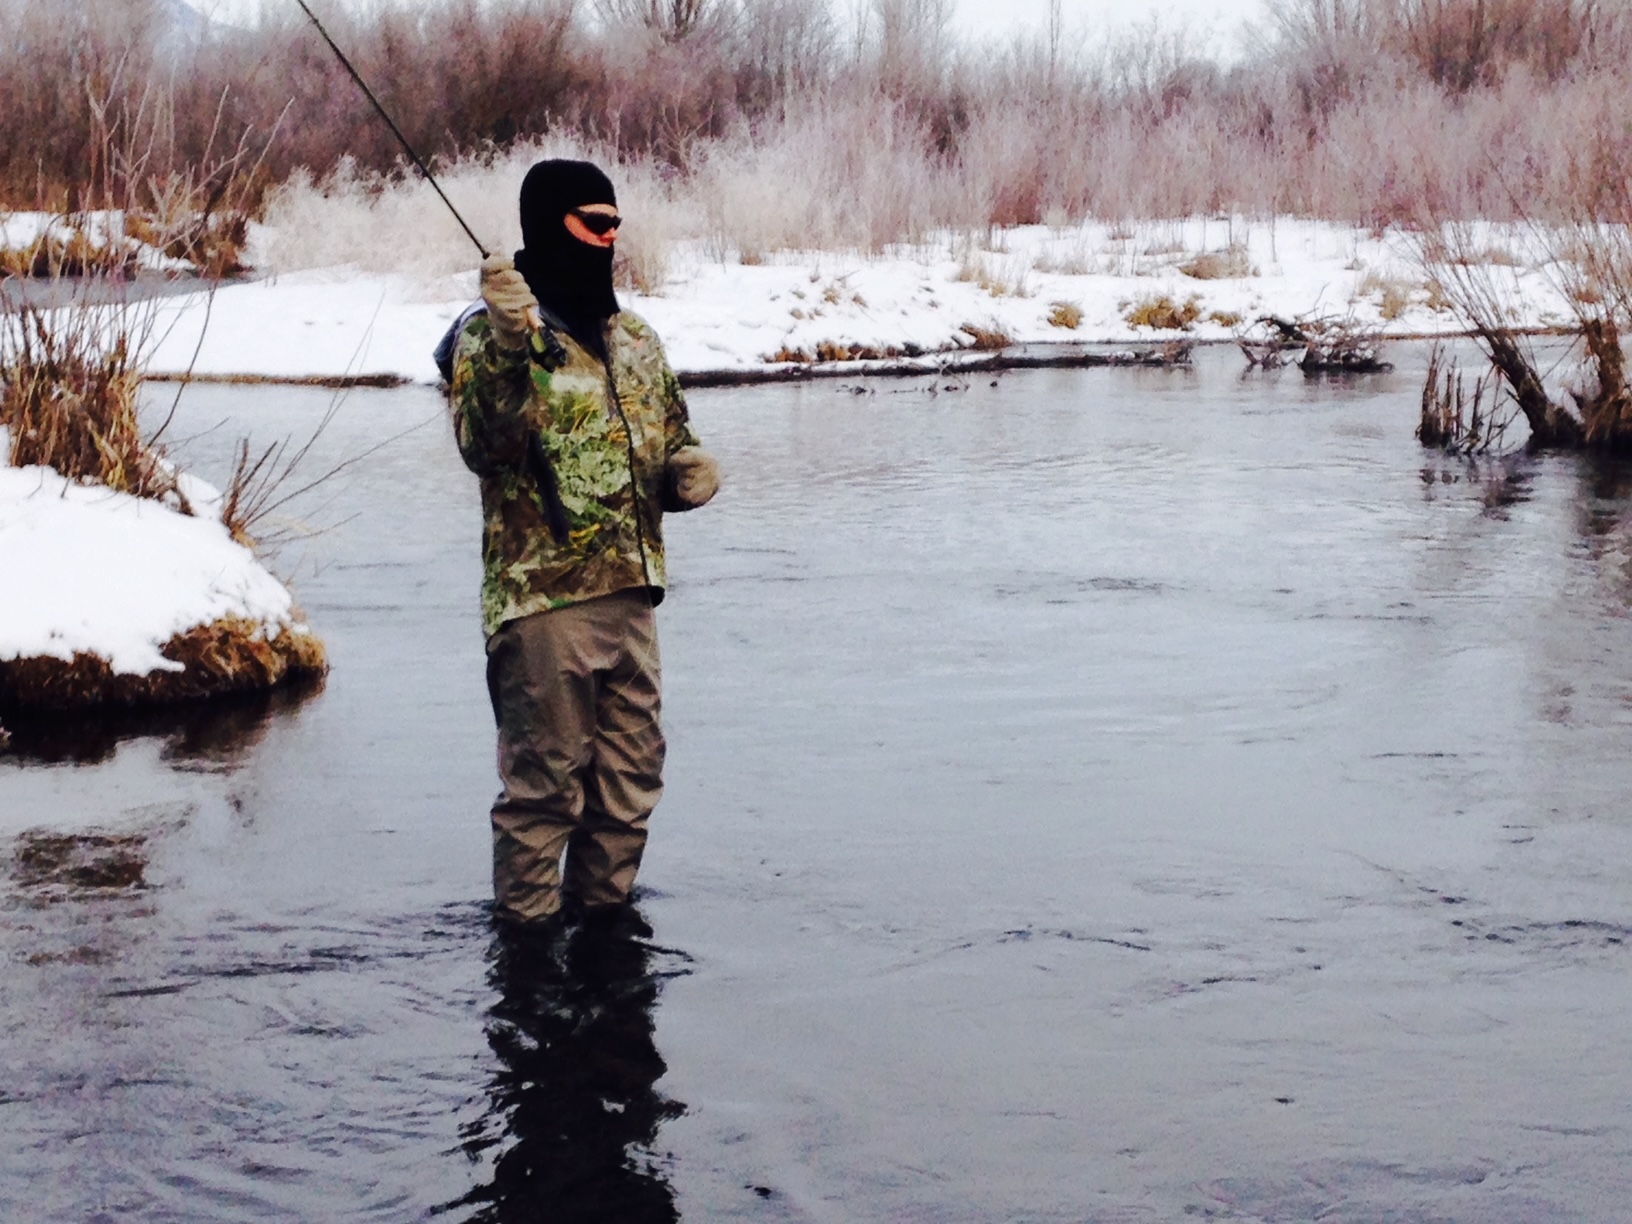 3 Great Rivers to Fish This Winter